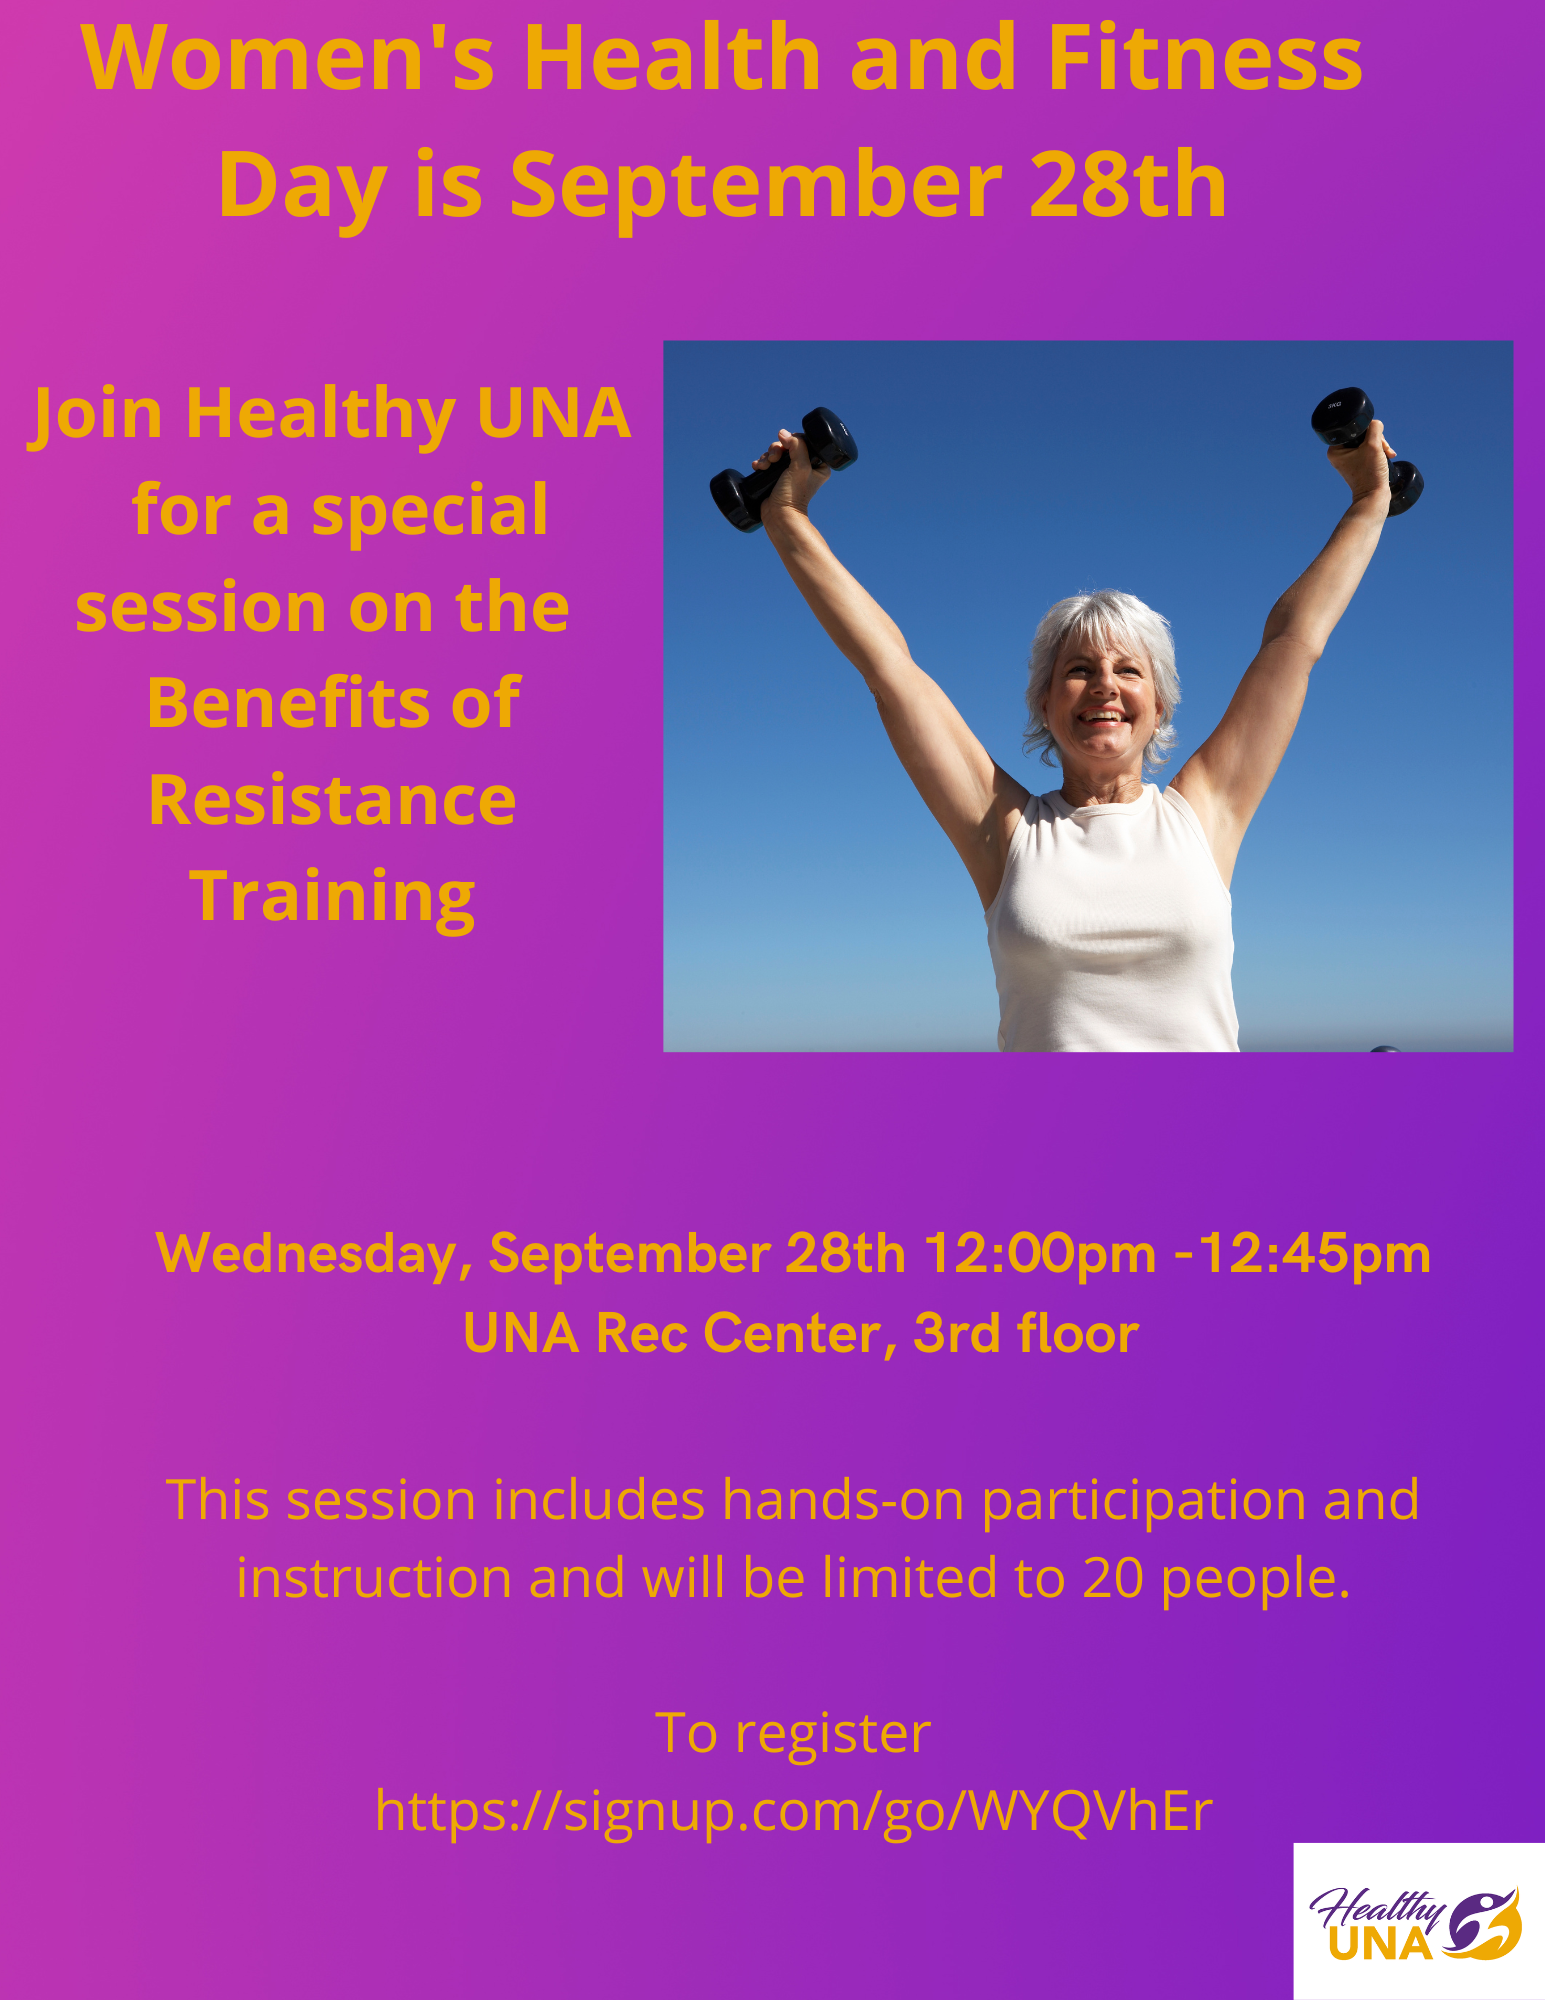 resistance-training-demo-for-females-wednesday,-september-28th-1200-pm--1230-pm-this-session-offers-both-in-person-and-vertual-attendance.-in-person-attendance-will-be-limited-to-10-people-in-the-new-exercise-s-1.png